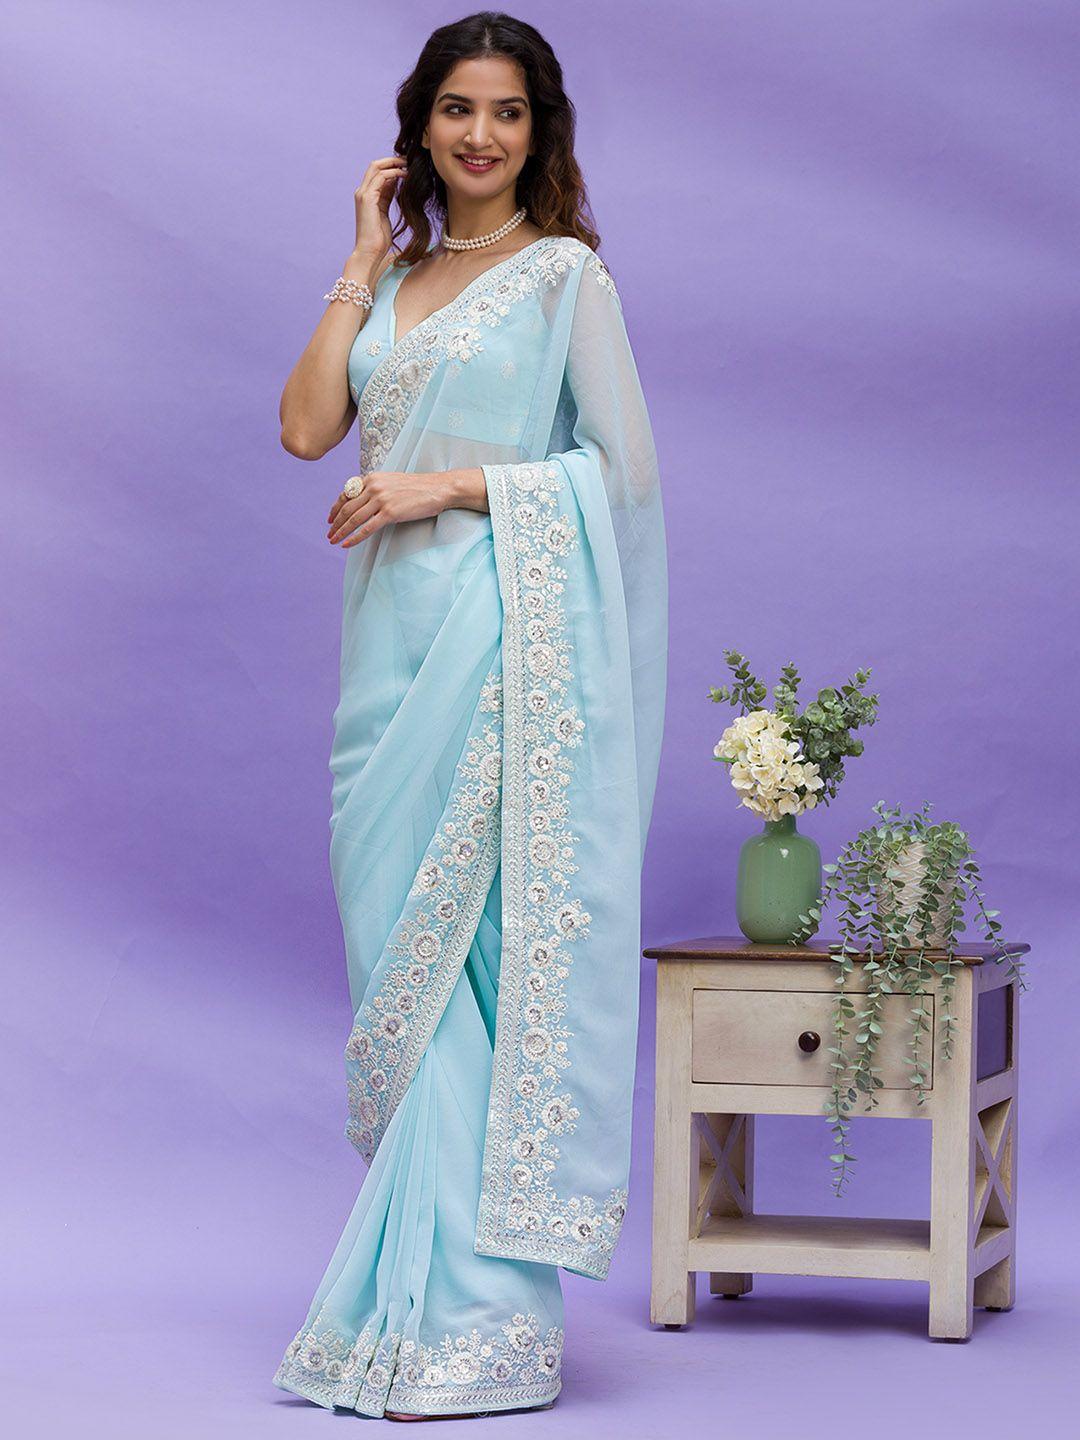 Koskii Blue & White Embroidered Poly Georgette Saree